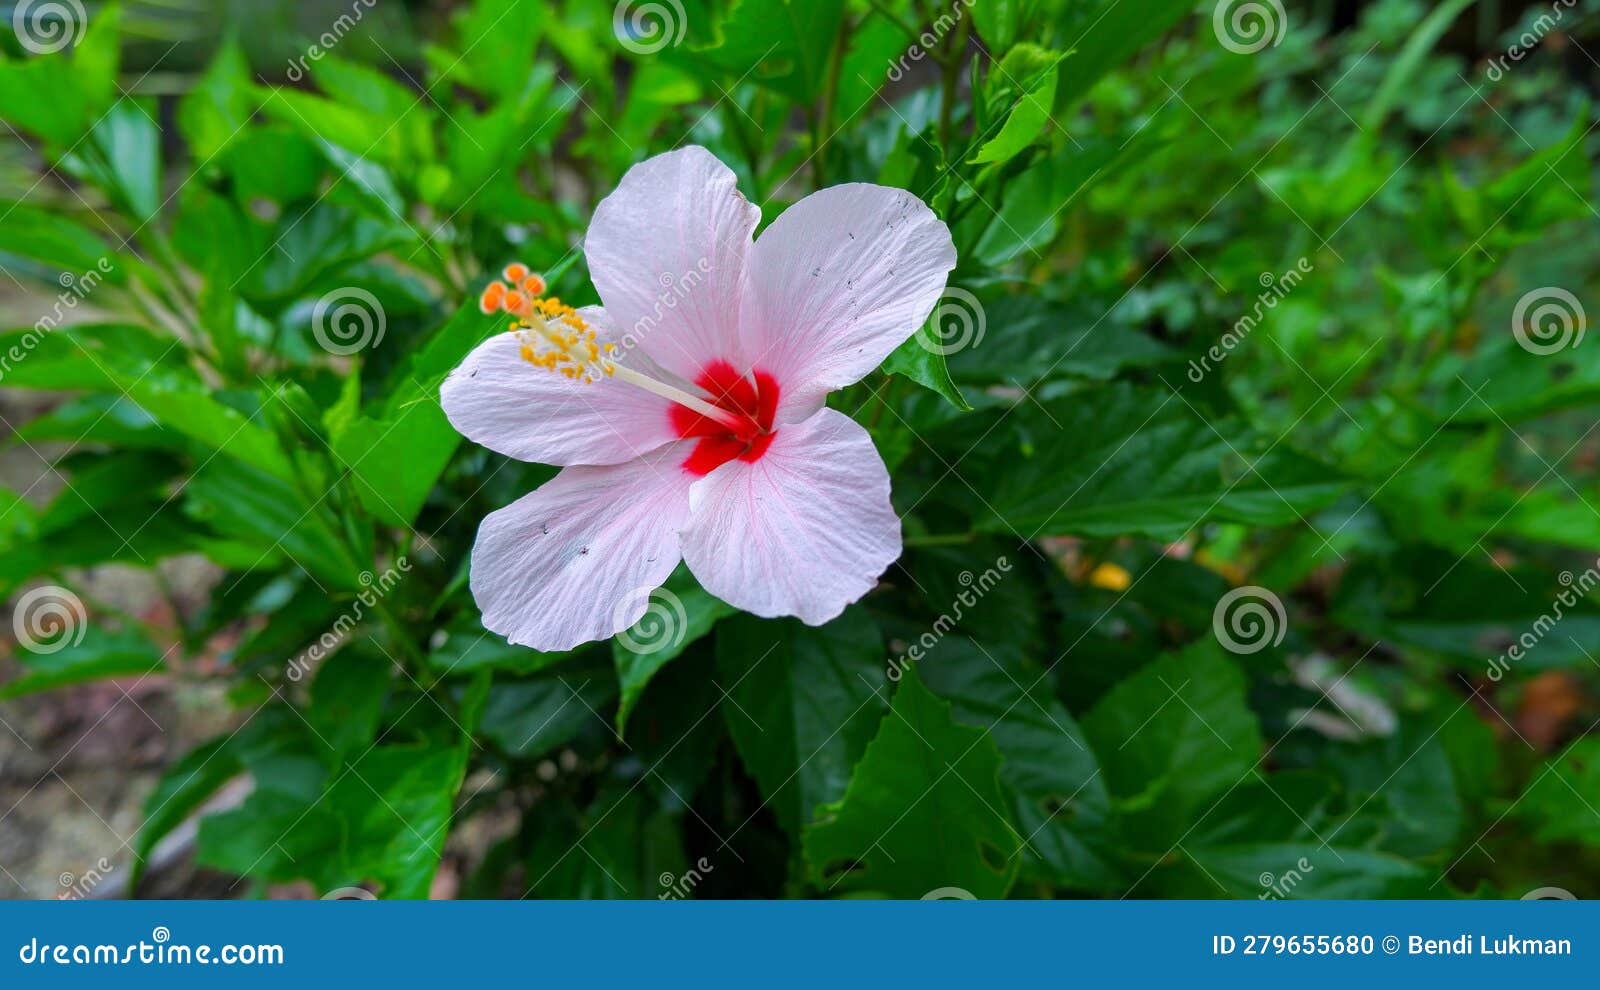 hibiscus flower (hibiscus rosa-sinensis) with white color